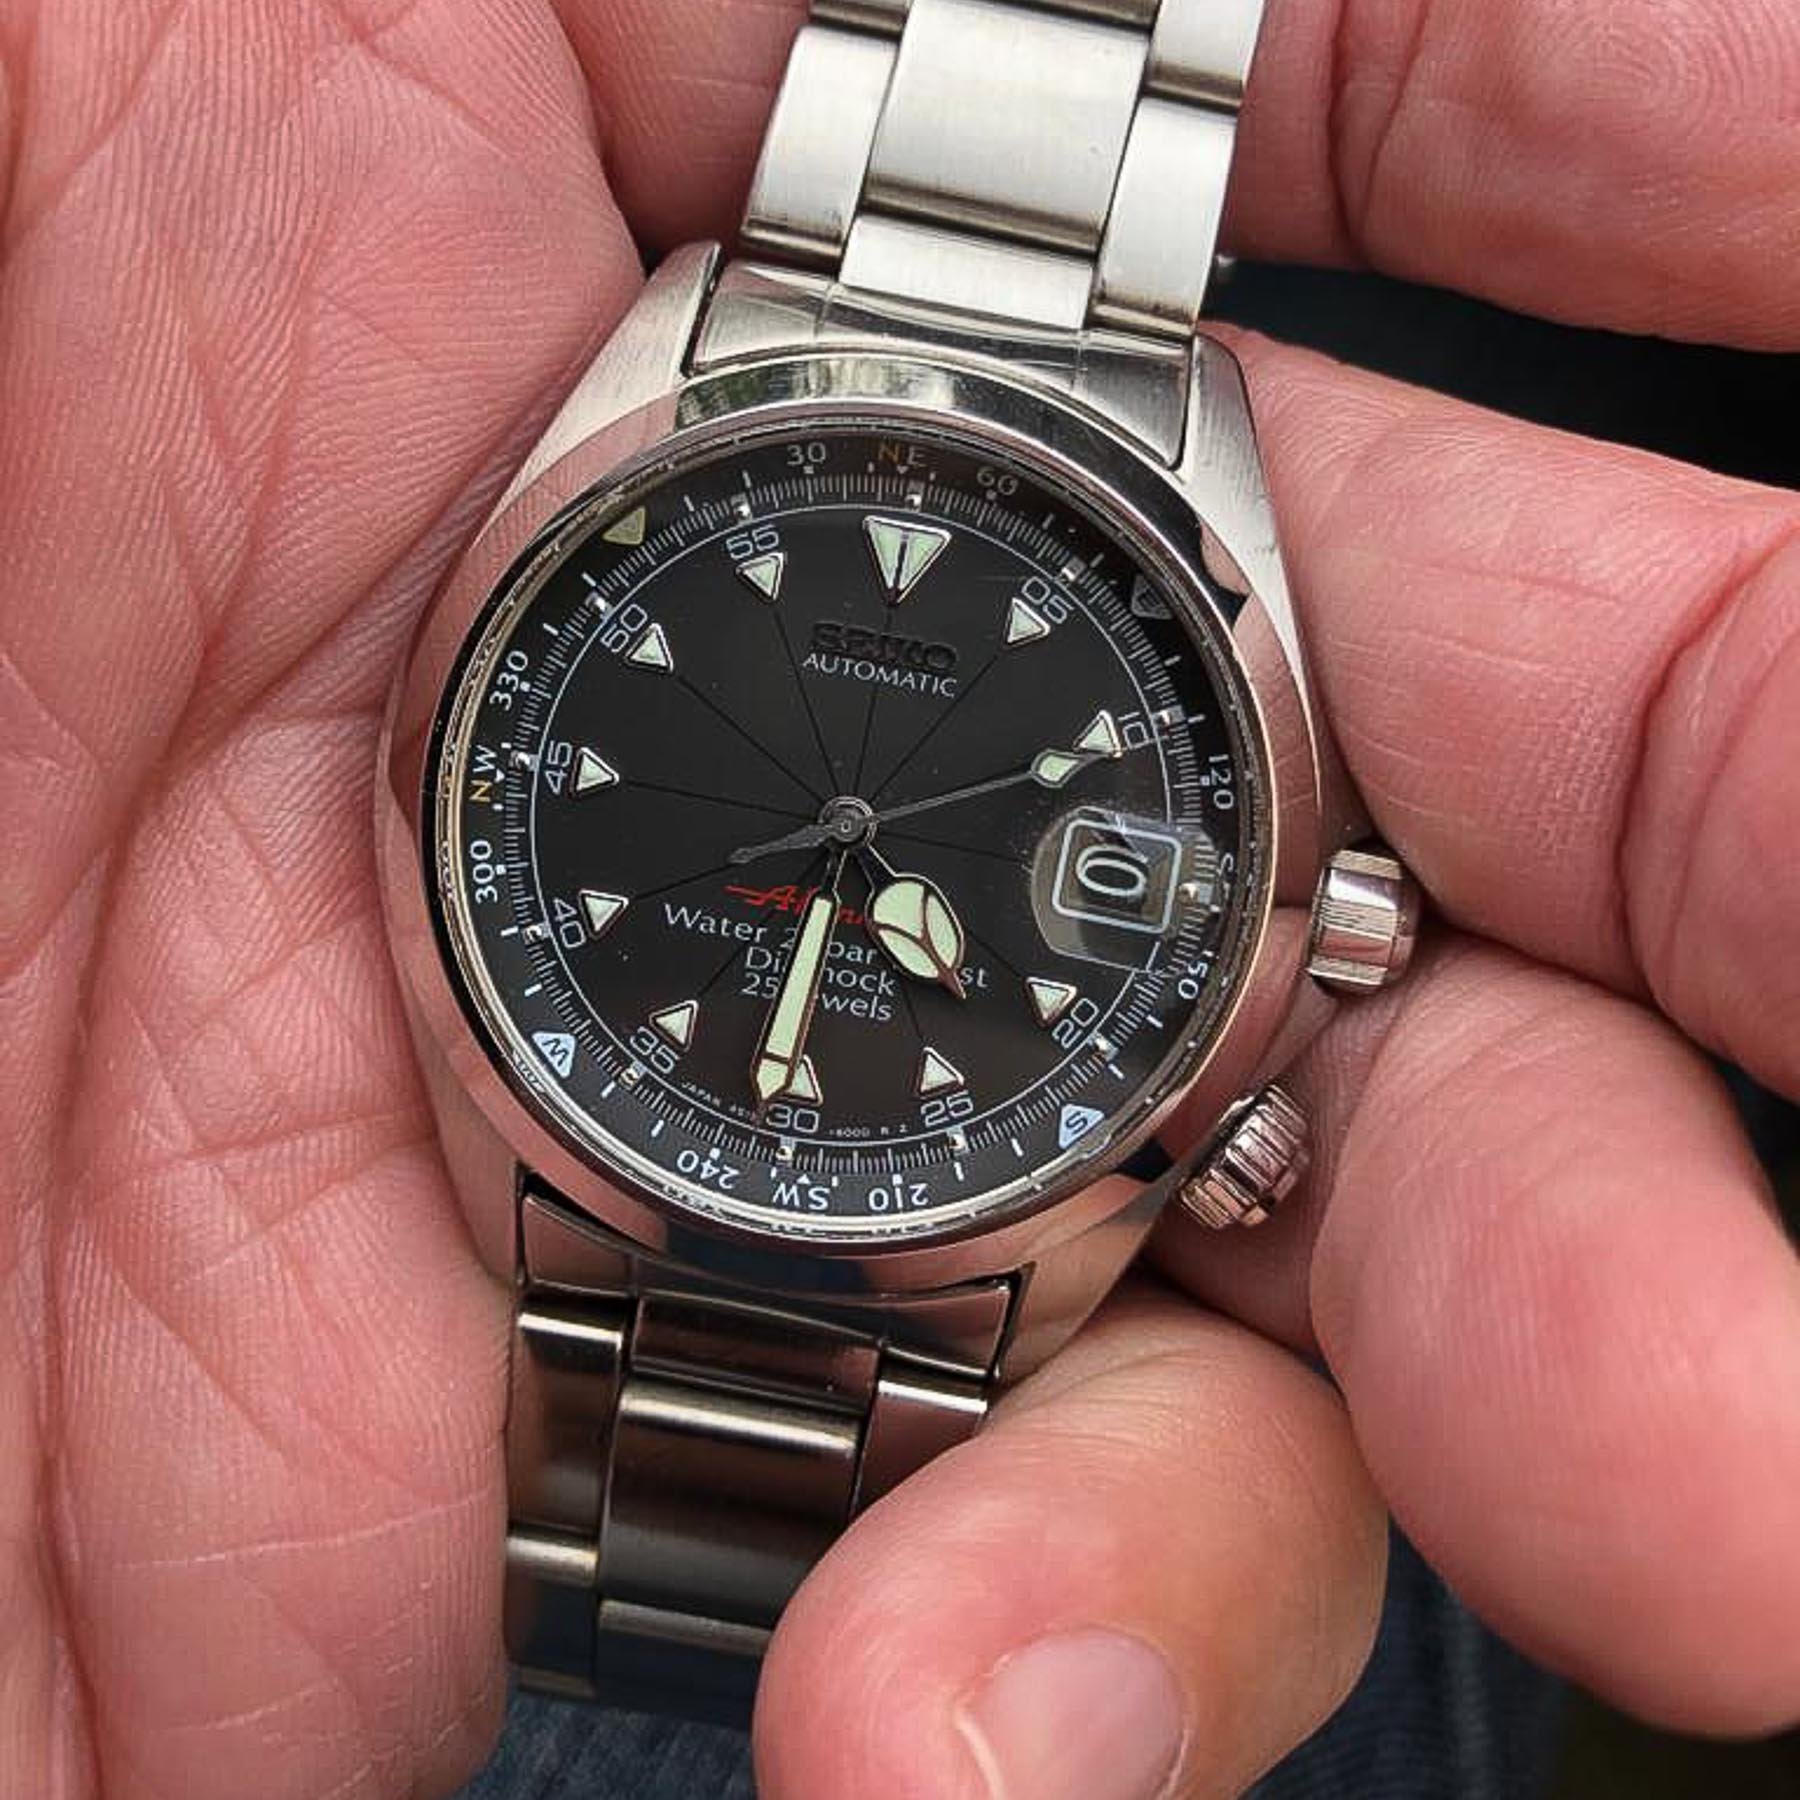 A Complete Overview of the Seiko Alpinist Line